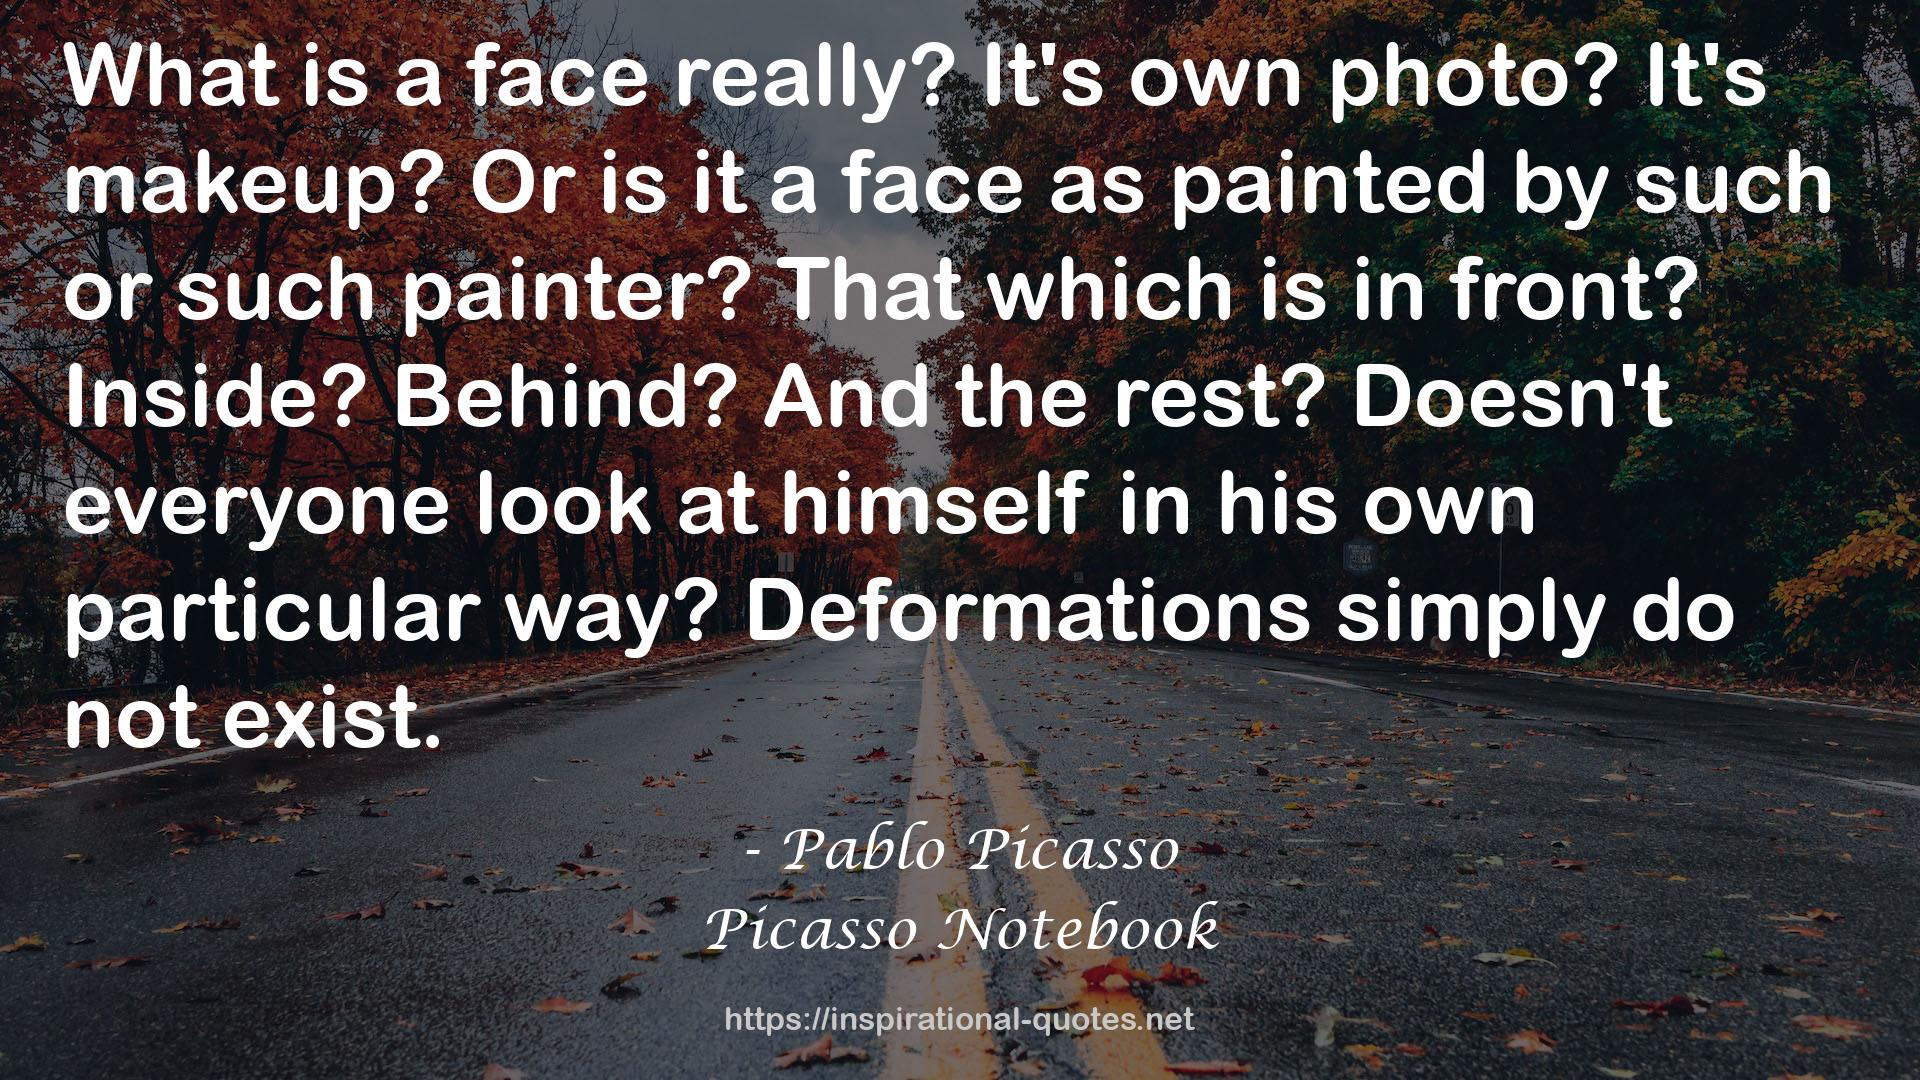 Picasso Notebook QUOTES